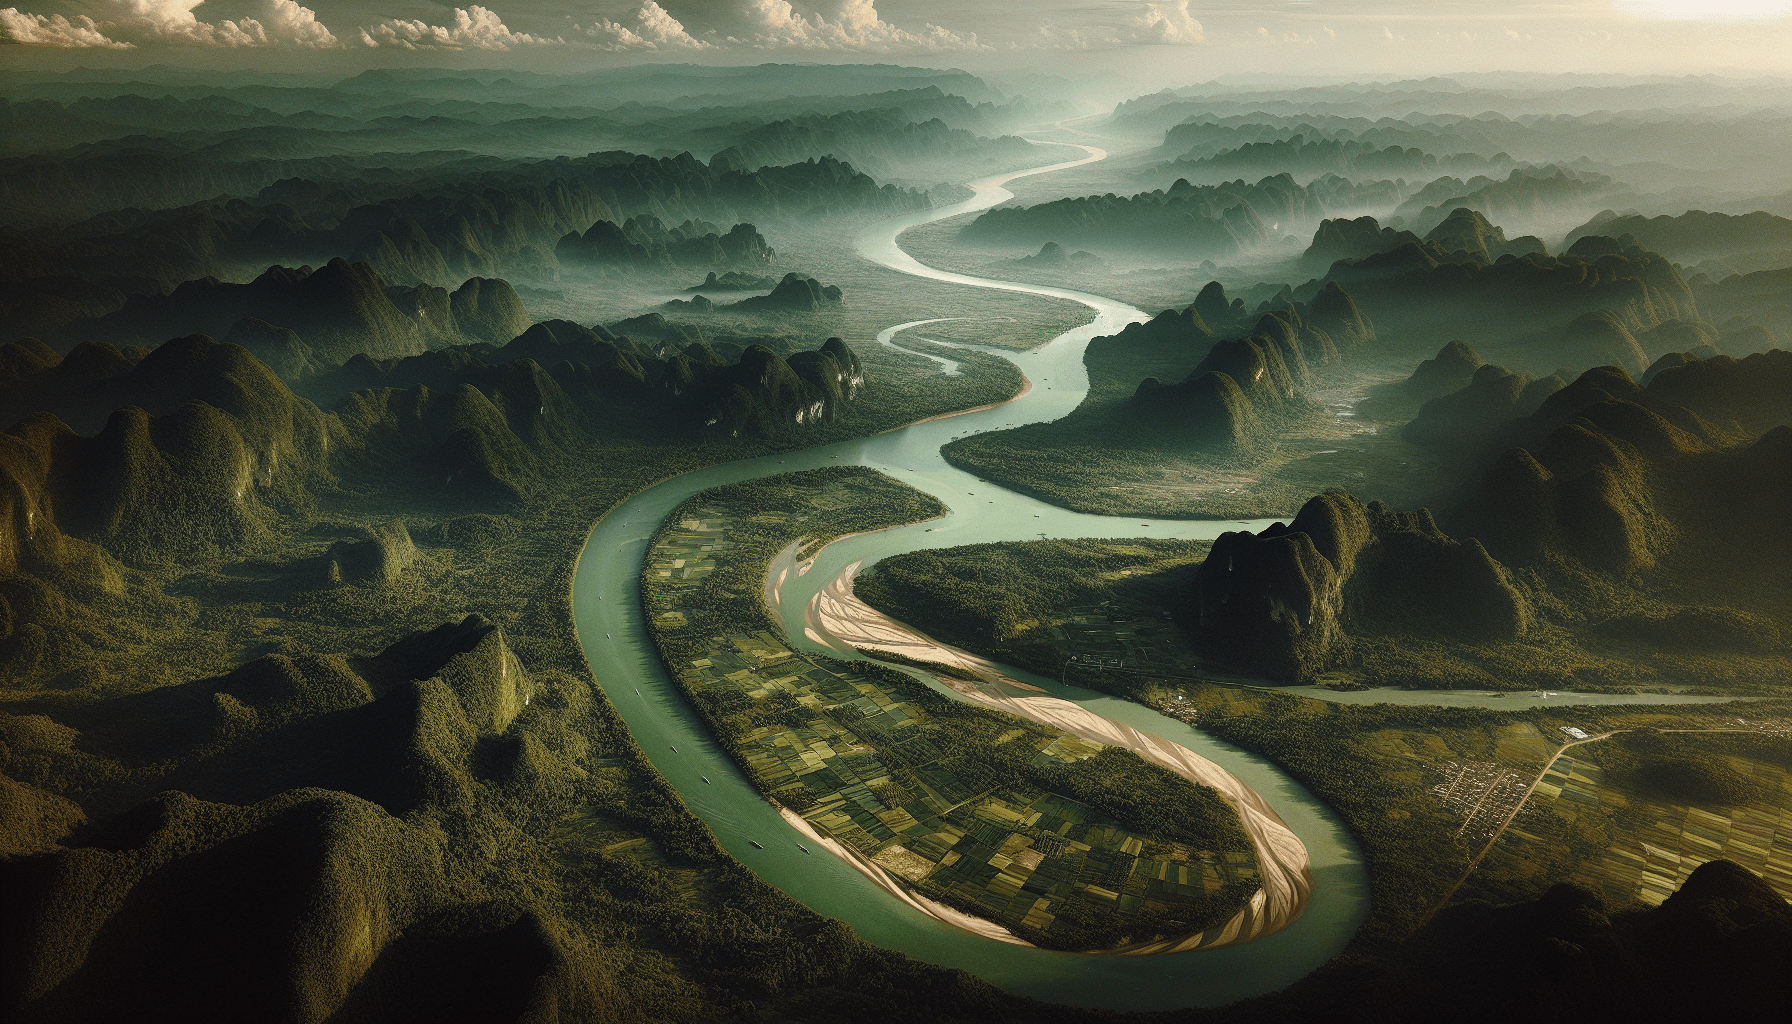 What Are The 2 Major Rivers In Southeast Asia?